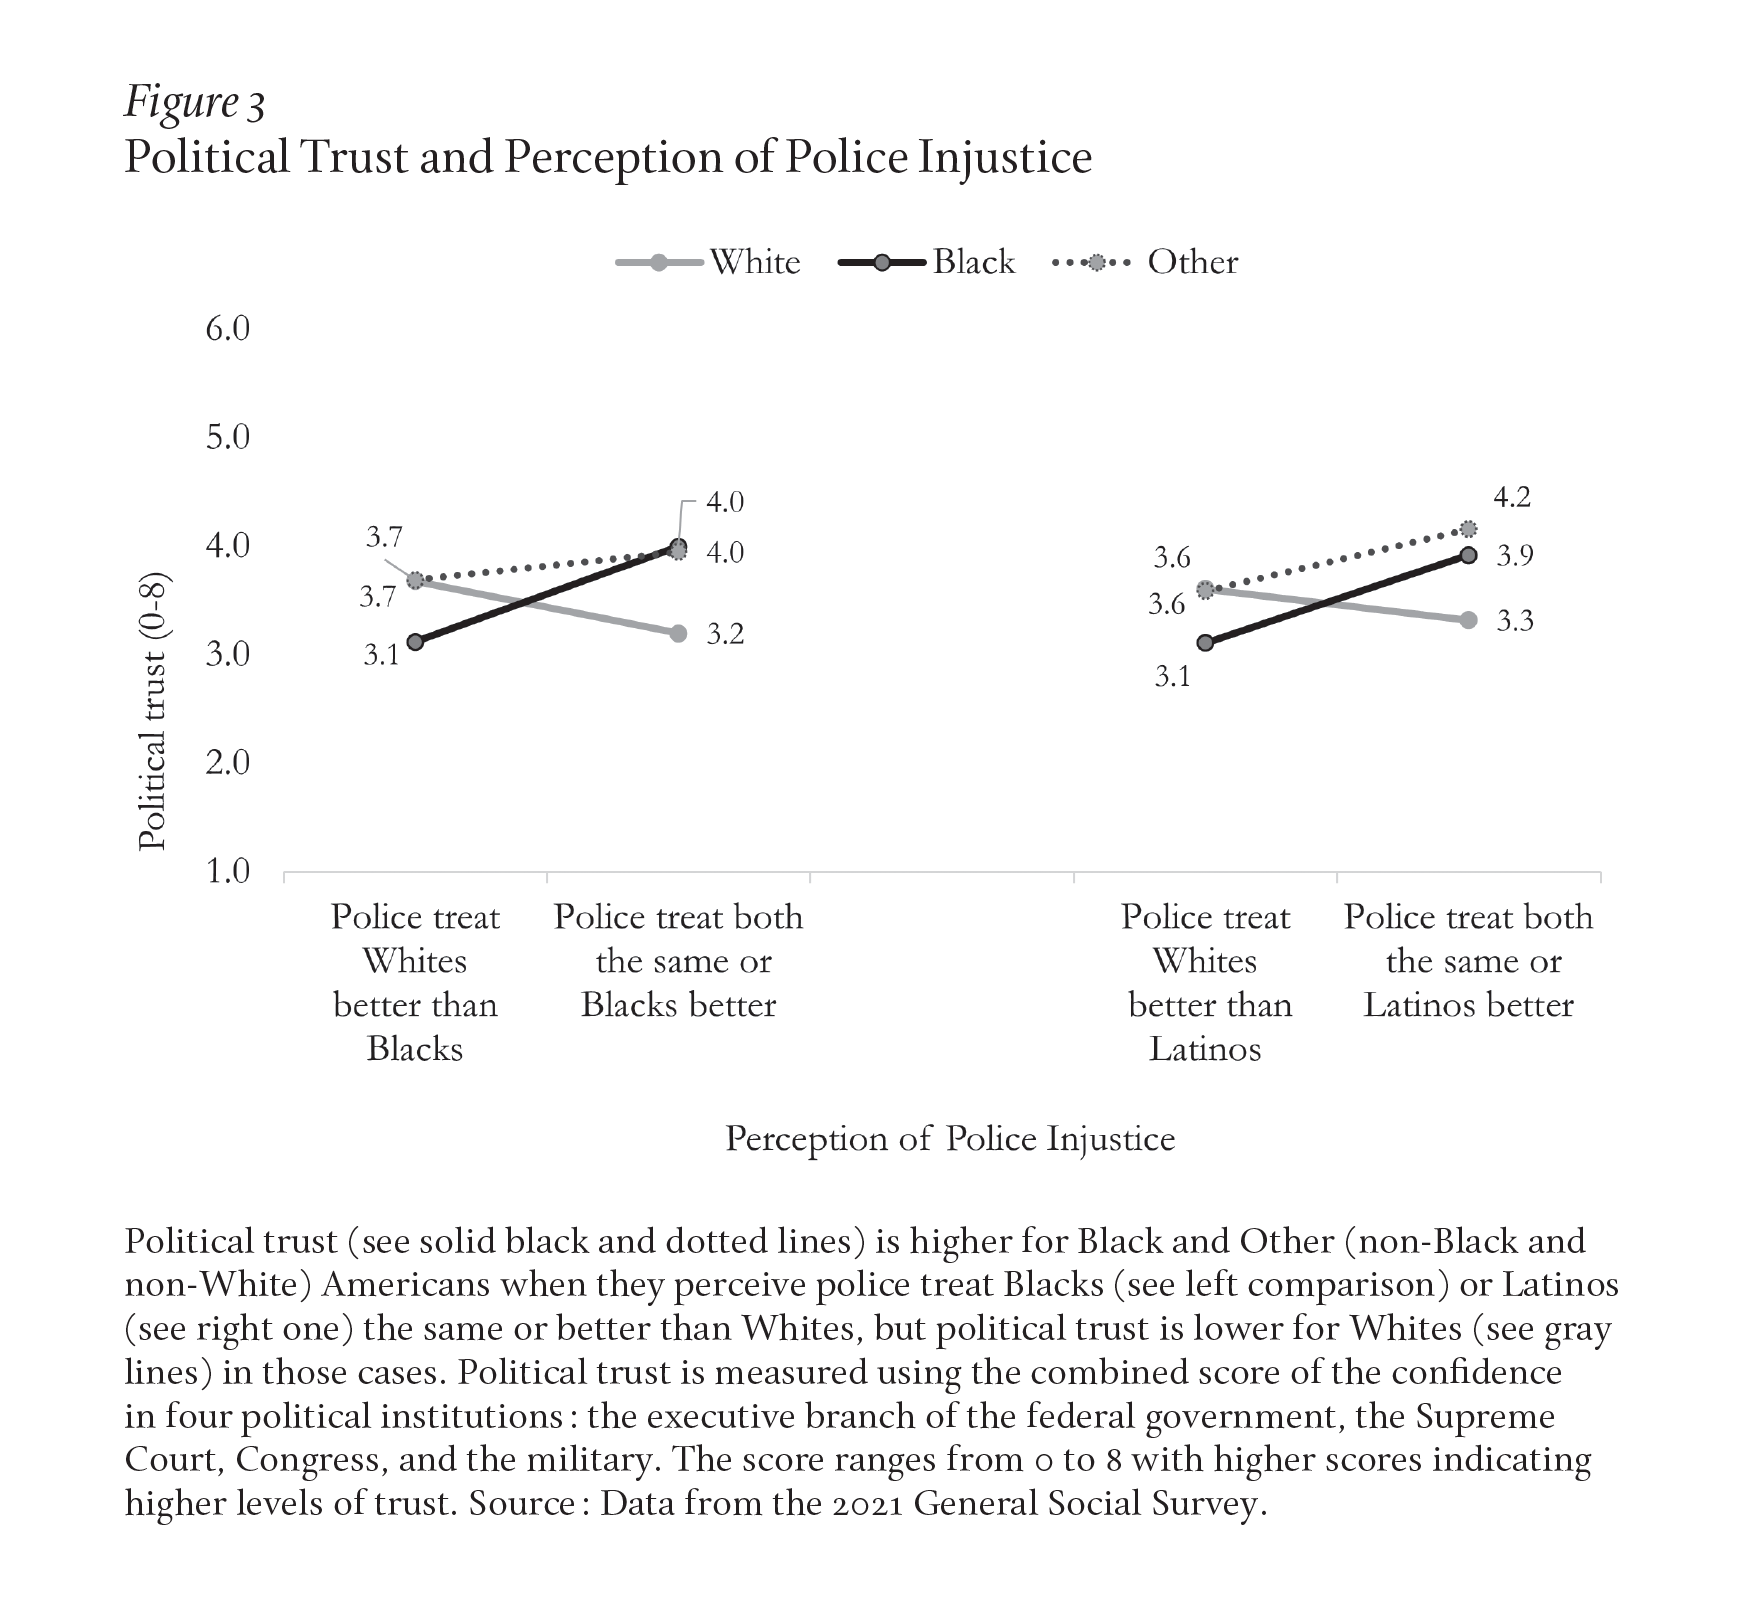 Political trust is higher for Black and Other Americans when they perceive police treat Blacks or Latinos the same or better than Whites, but political trust is lower for Whites in those cases. Political trust is measured using the combined score of the confidence in four political institutions: the executive branch of the federal government, the Supreme Court, Congress, and the military. Data from 2021 General Social Survey.